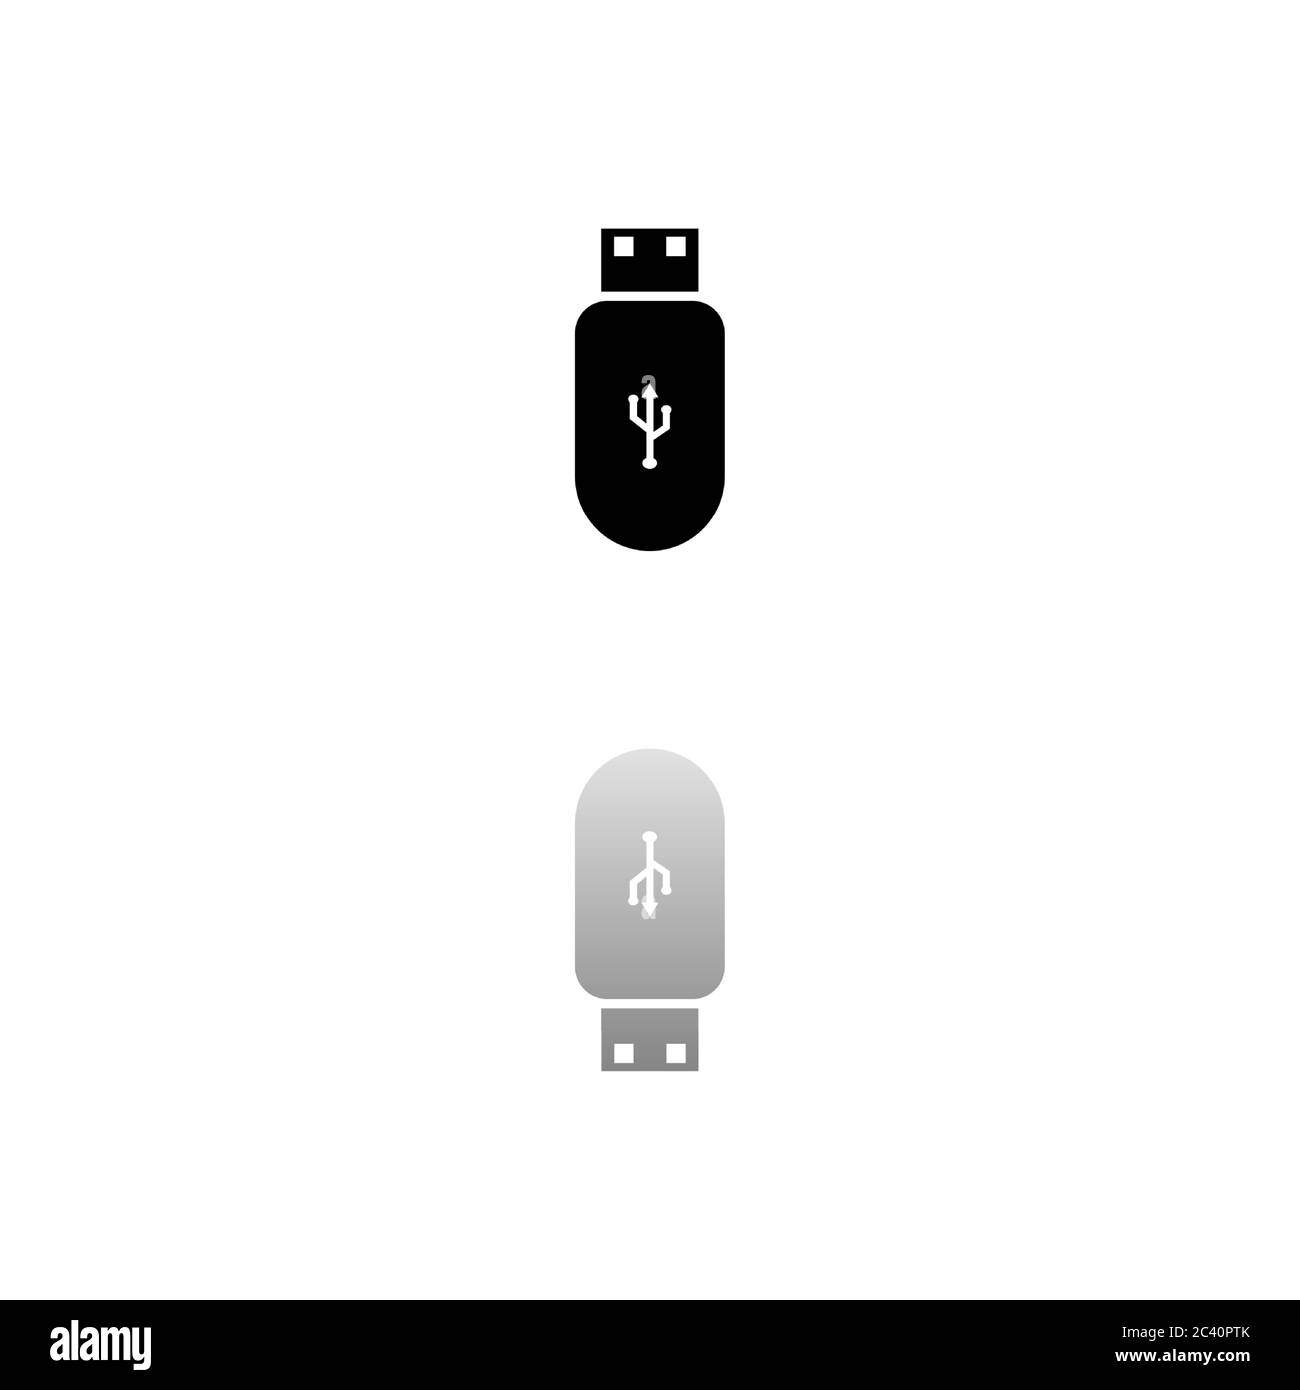 Usb flash drive. Black symbol on white background. Simple illustration. Flat Vector Icon. Mirror Reflection Shadow. Can be used in logo, web, mobile a Stock Vector